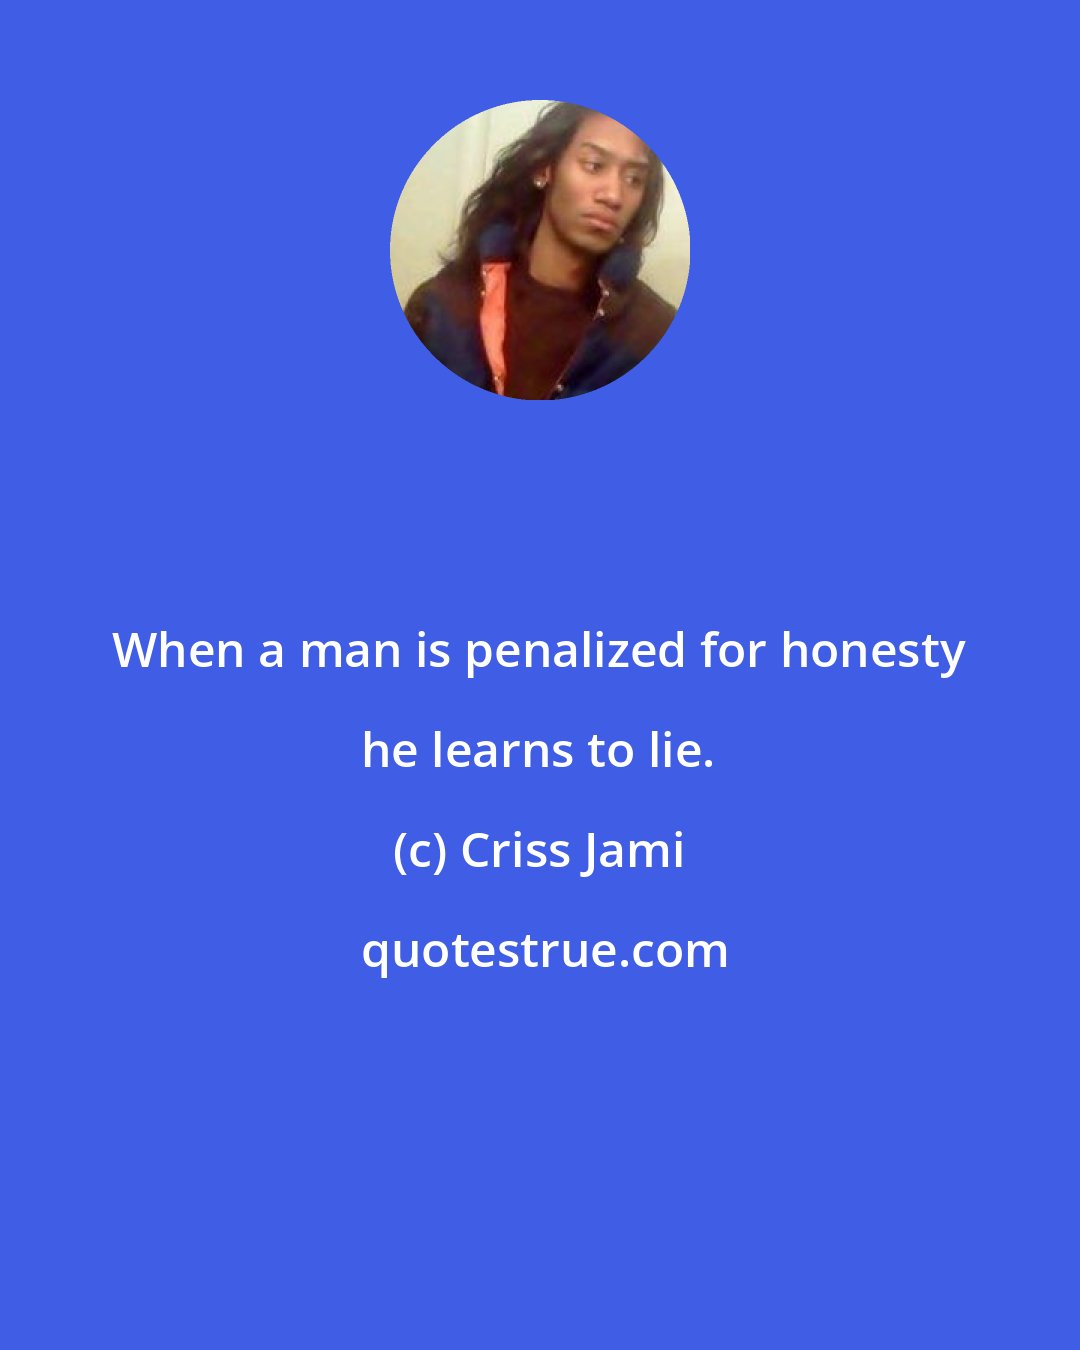 Criss Jami: When a man is penalized for honesty he learns to lie.